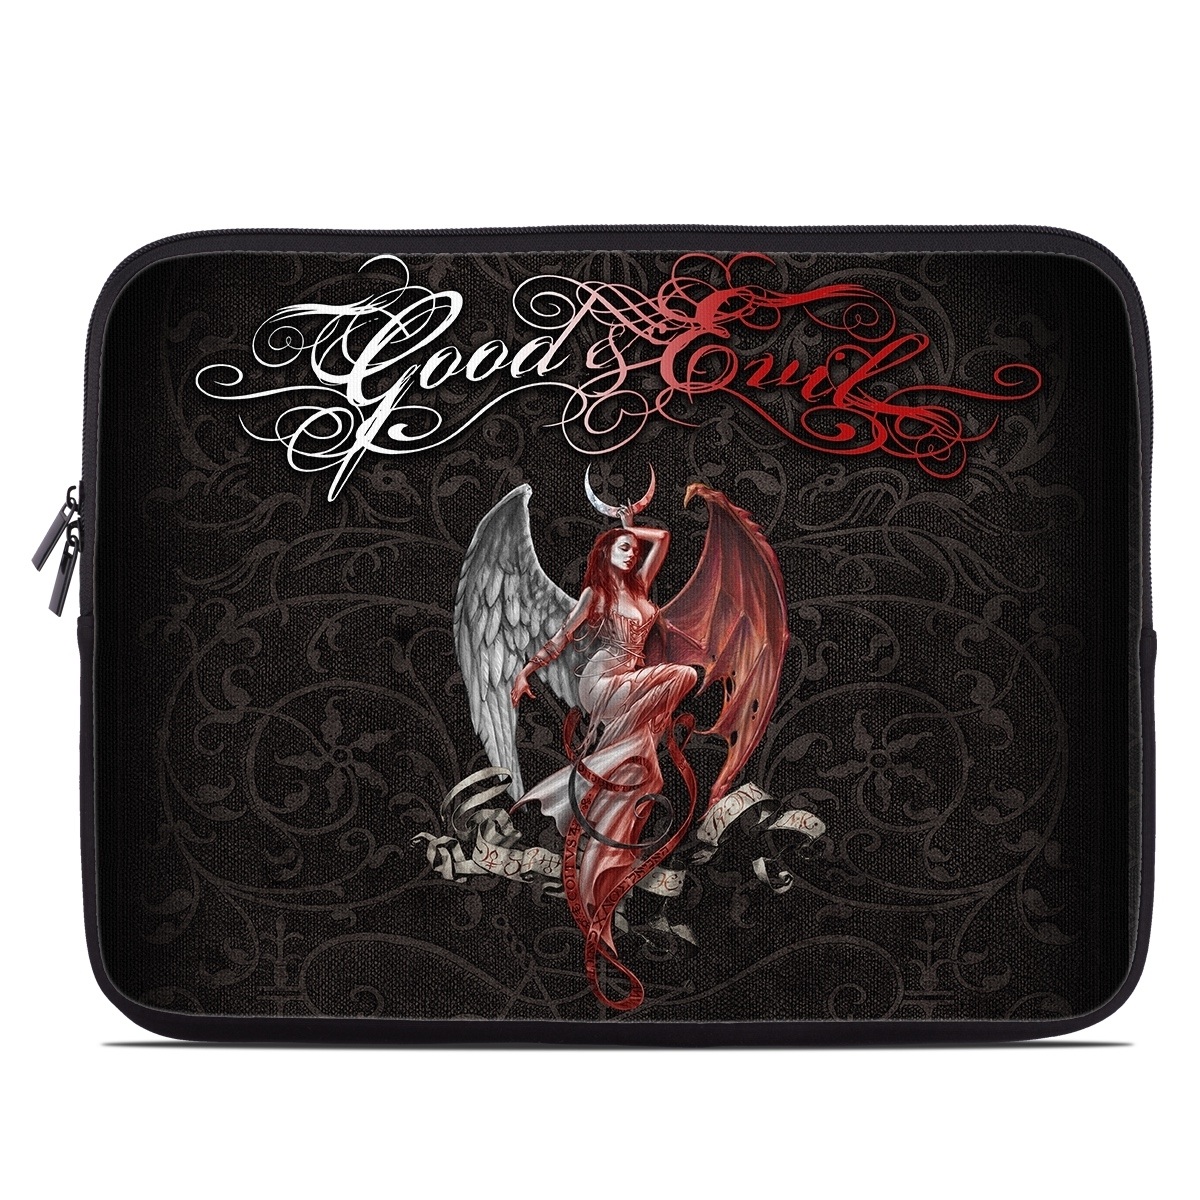 Laptop Sleeve - Good and Evil (Image 1)